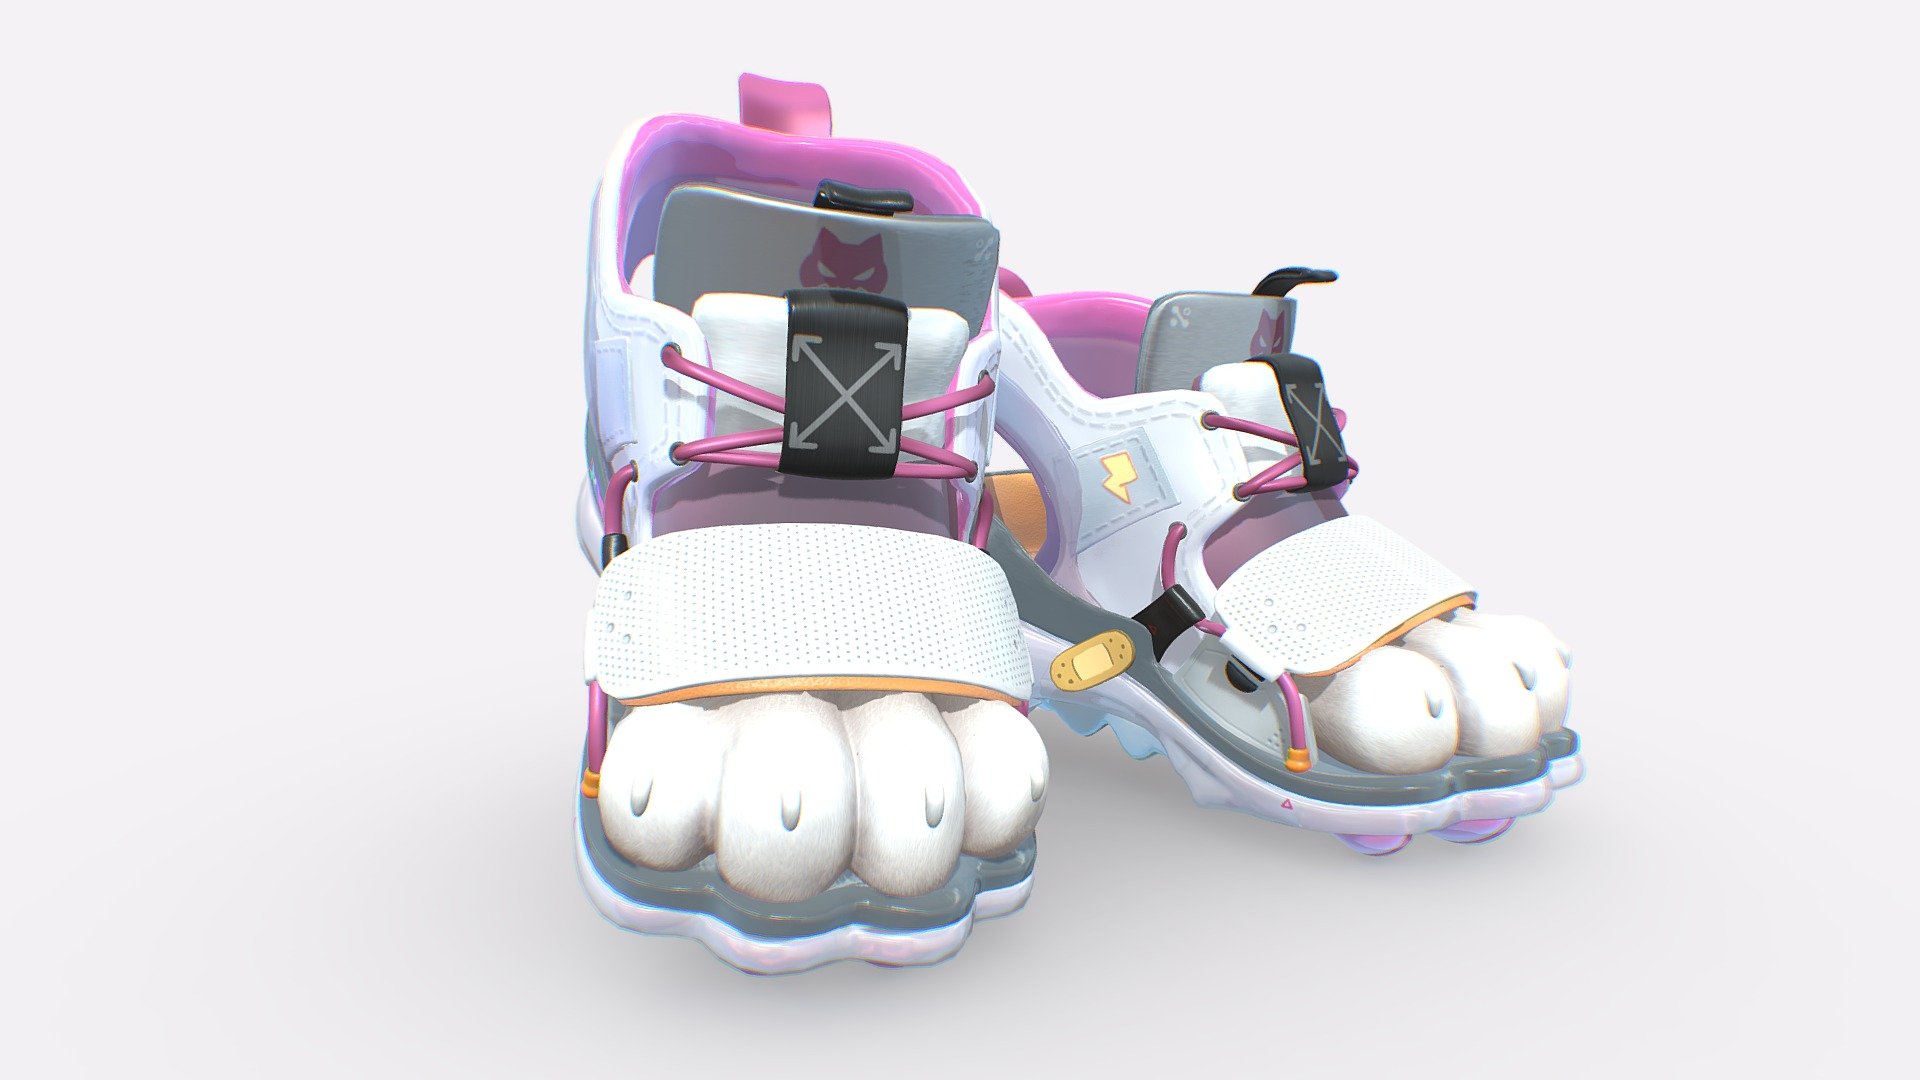 A 3D model of a pair of super cute CATsCANDY sneakers. 
Concept art from Moxuan zhang (links below).

modeled in Maya and z brush, textures in substance painter.
my first attempmt in making shoes using PBR materials.

Thank you so much Moxuan for giving me permisssion to use your concept art!
Moxuan zhang links:
Artstation: artstation.com/zhangmoxuan
twitter: twitter.com/MoxuanZhang
insta: instagram.com/moxuanzhangart/ - CATs CANDY [Concept by Moxuan zhang] - Download Free 3D model by Kanna-Nakajima 3d model